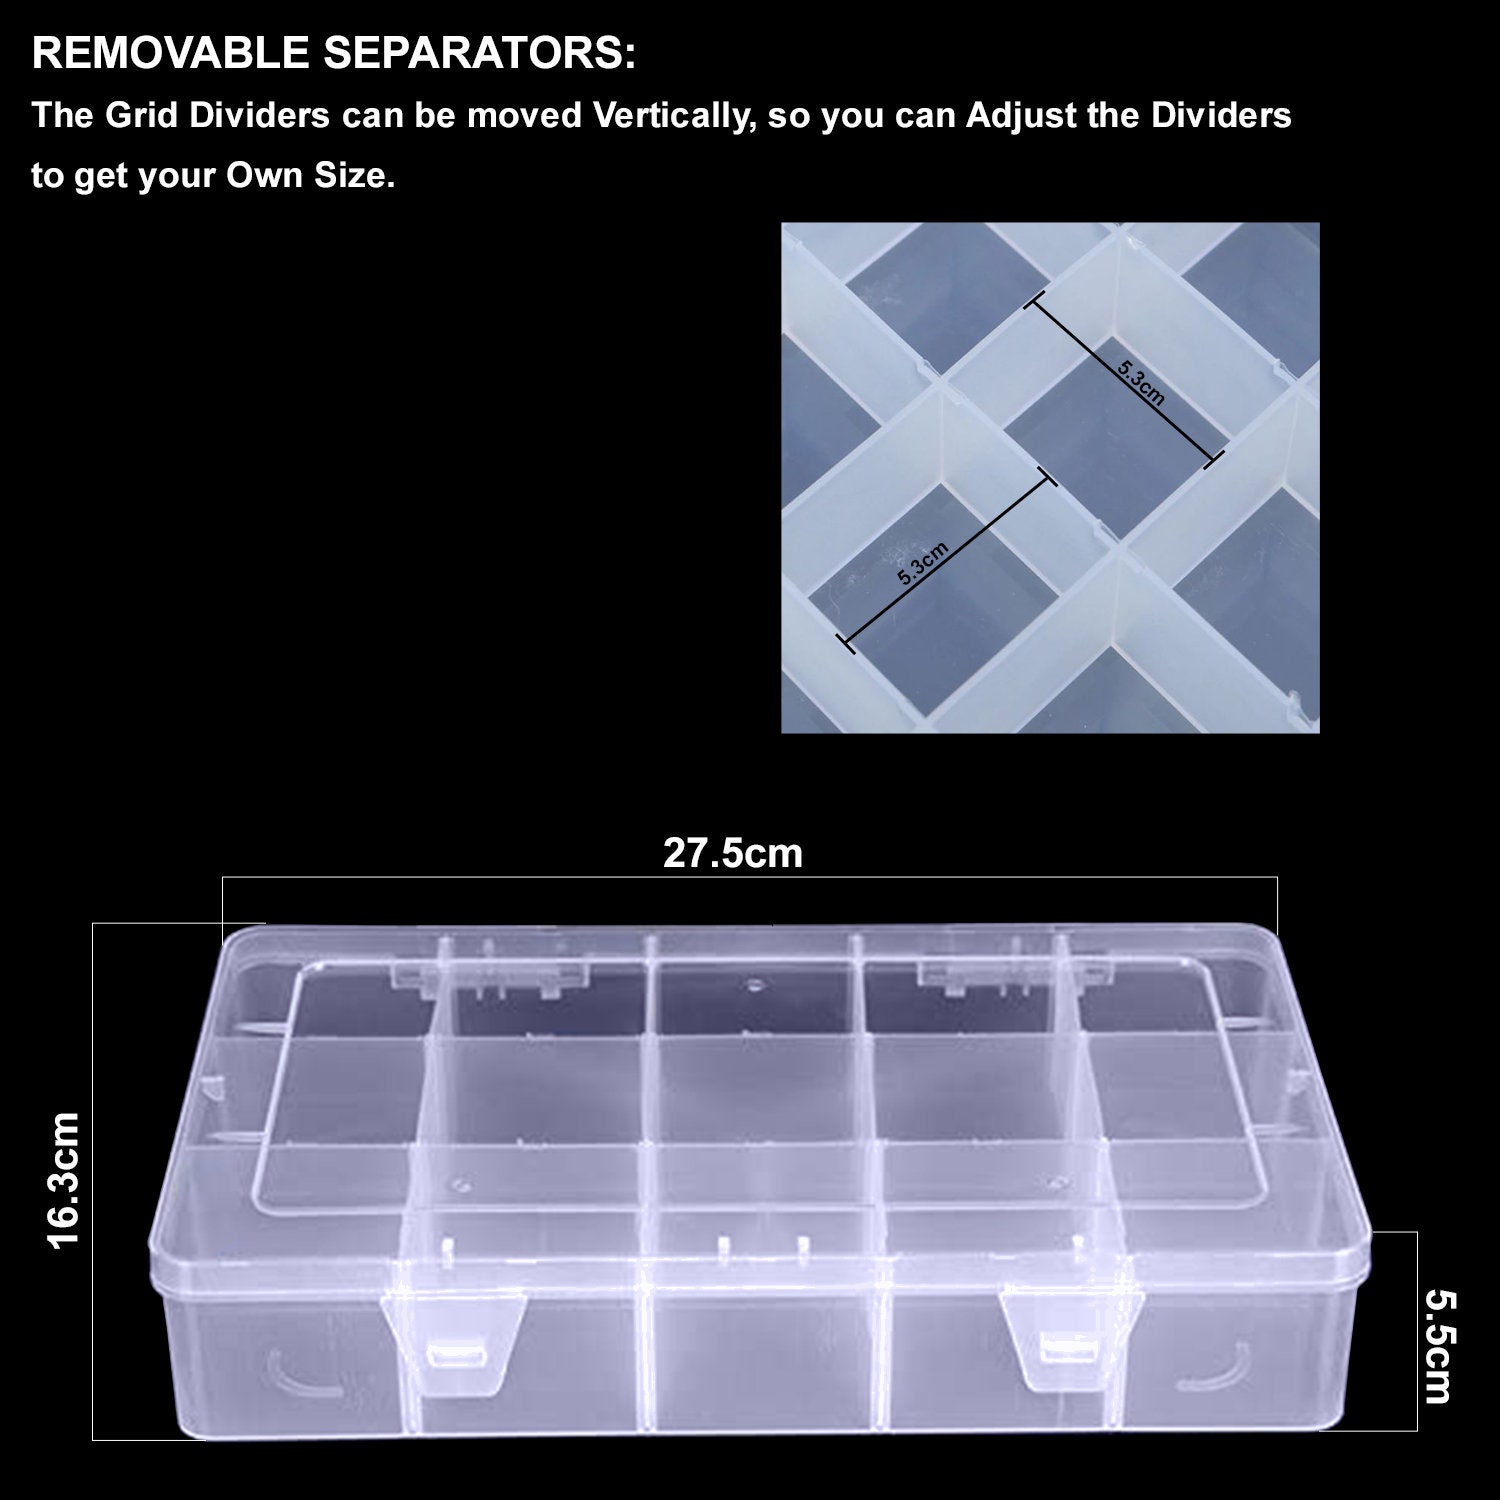  BTremary 15 Grids Clear Plastic Storage Box with